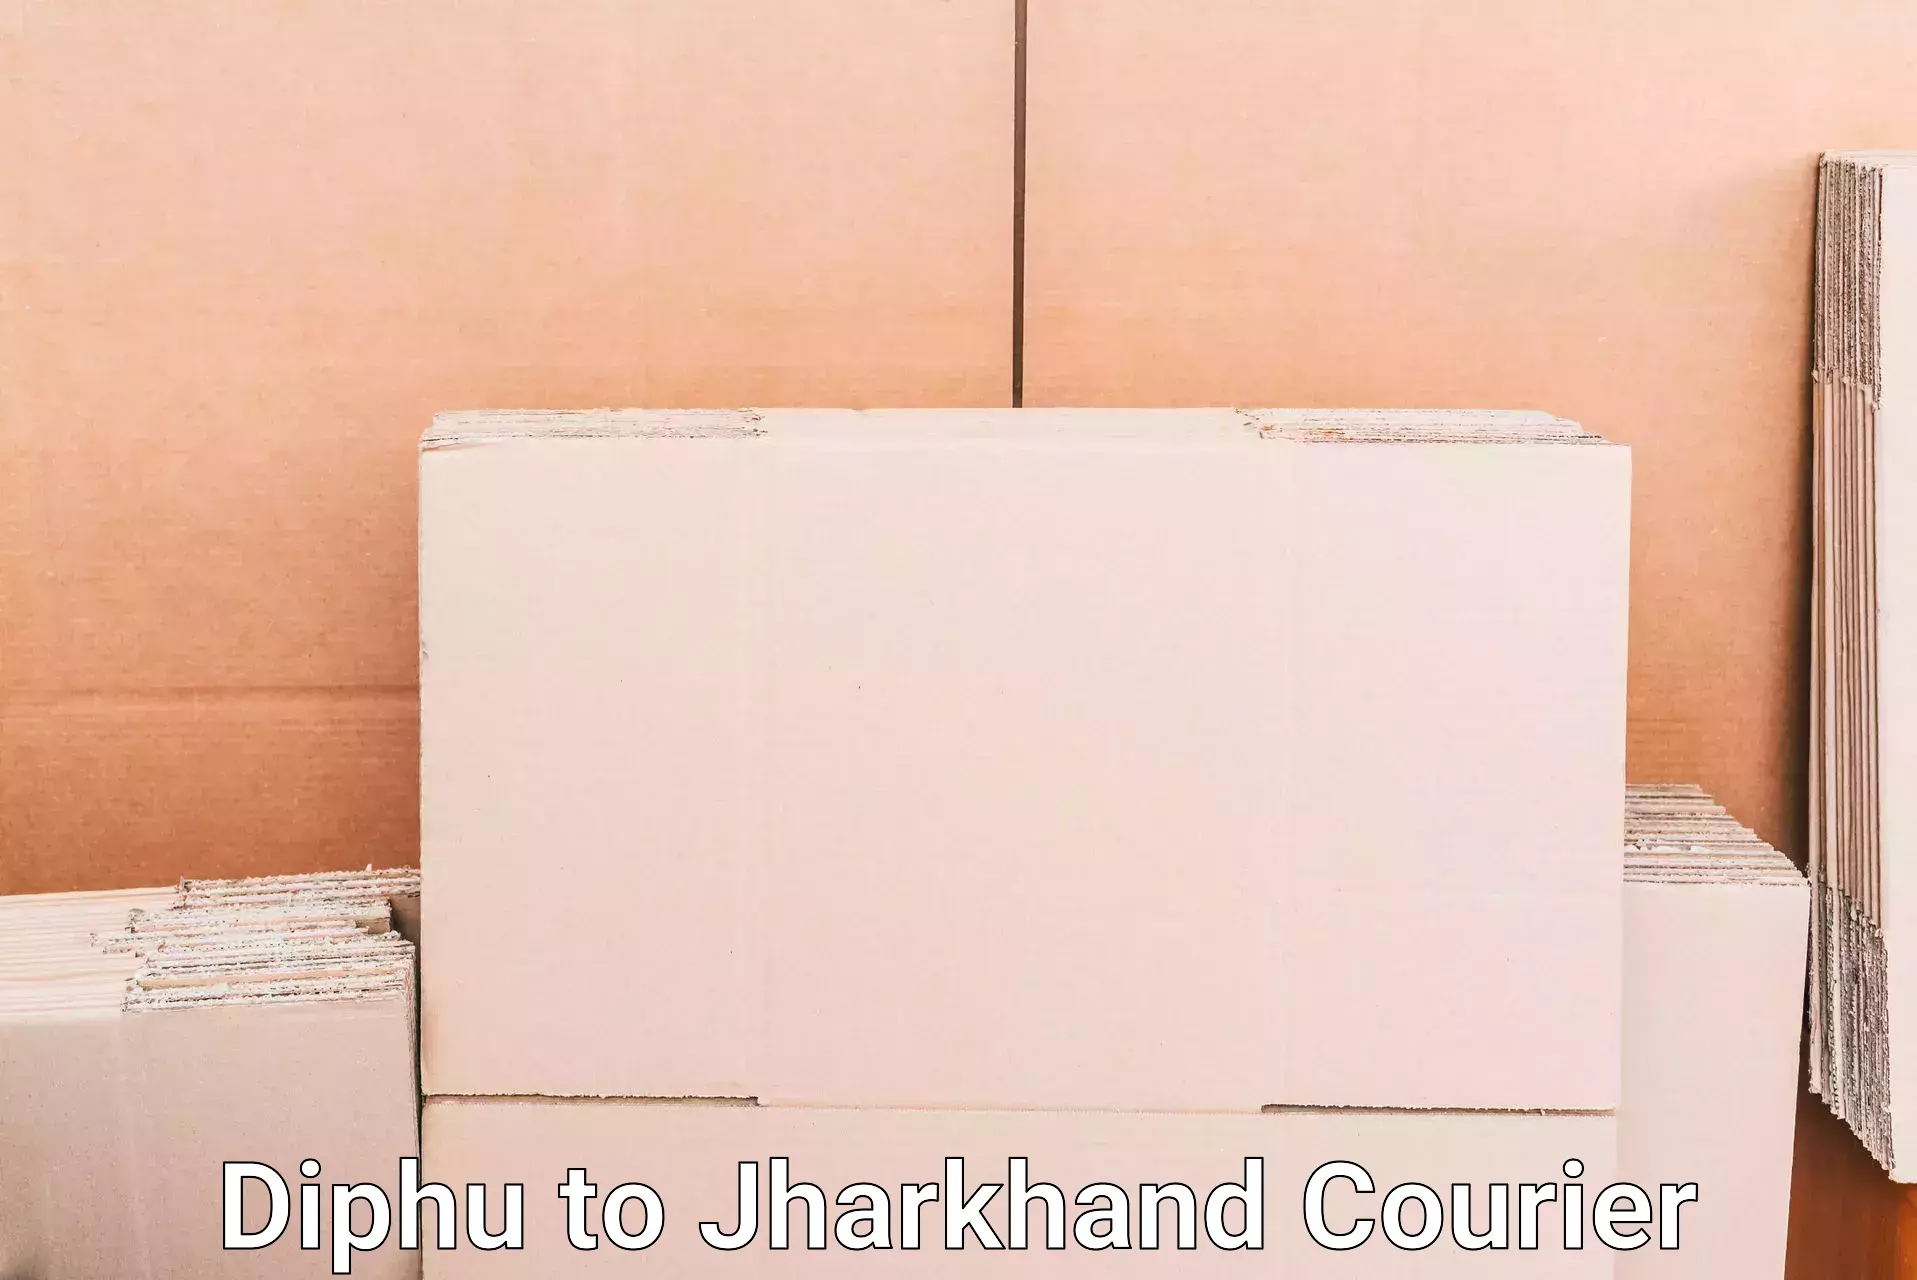 Luggage transport consultancy Diphu to Jharkhand